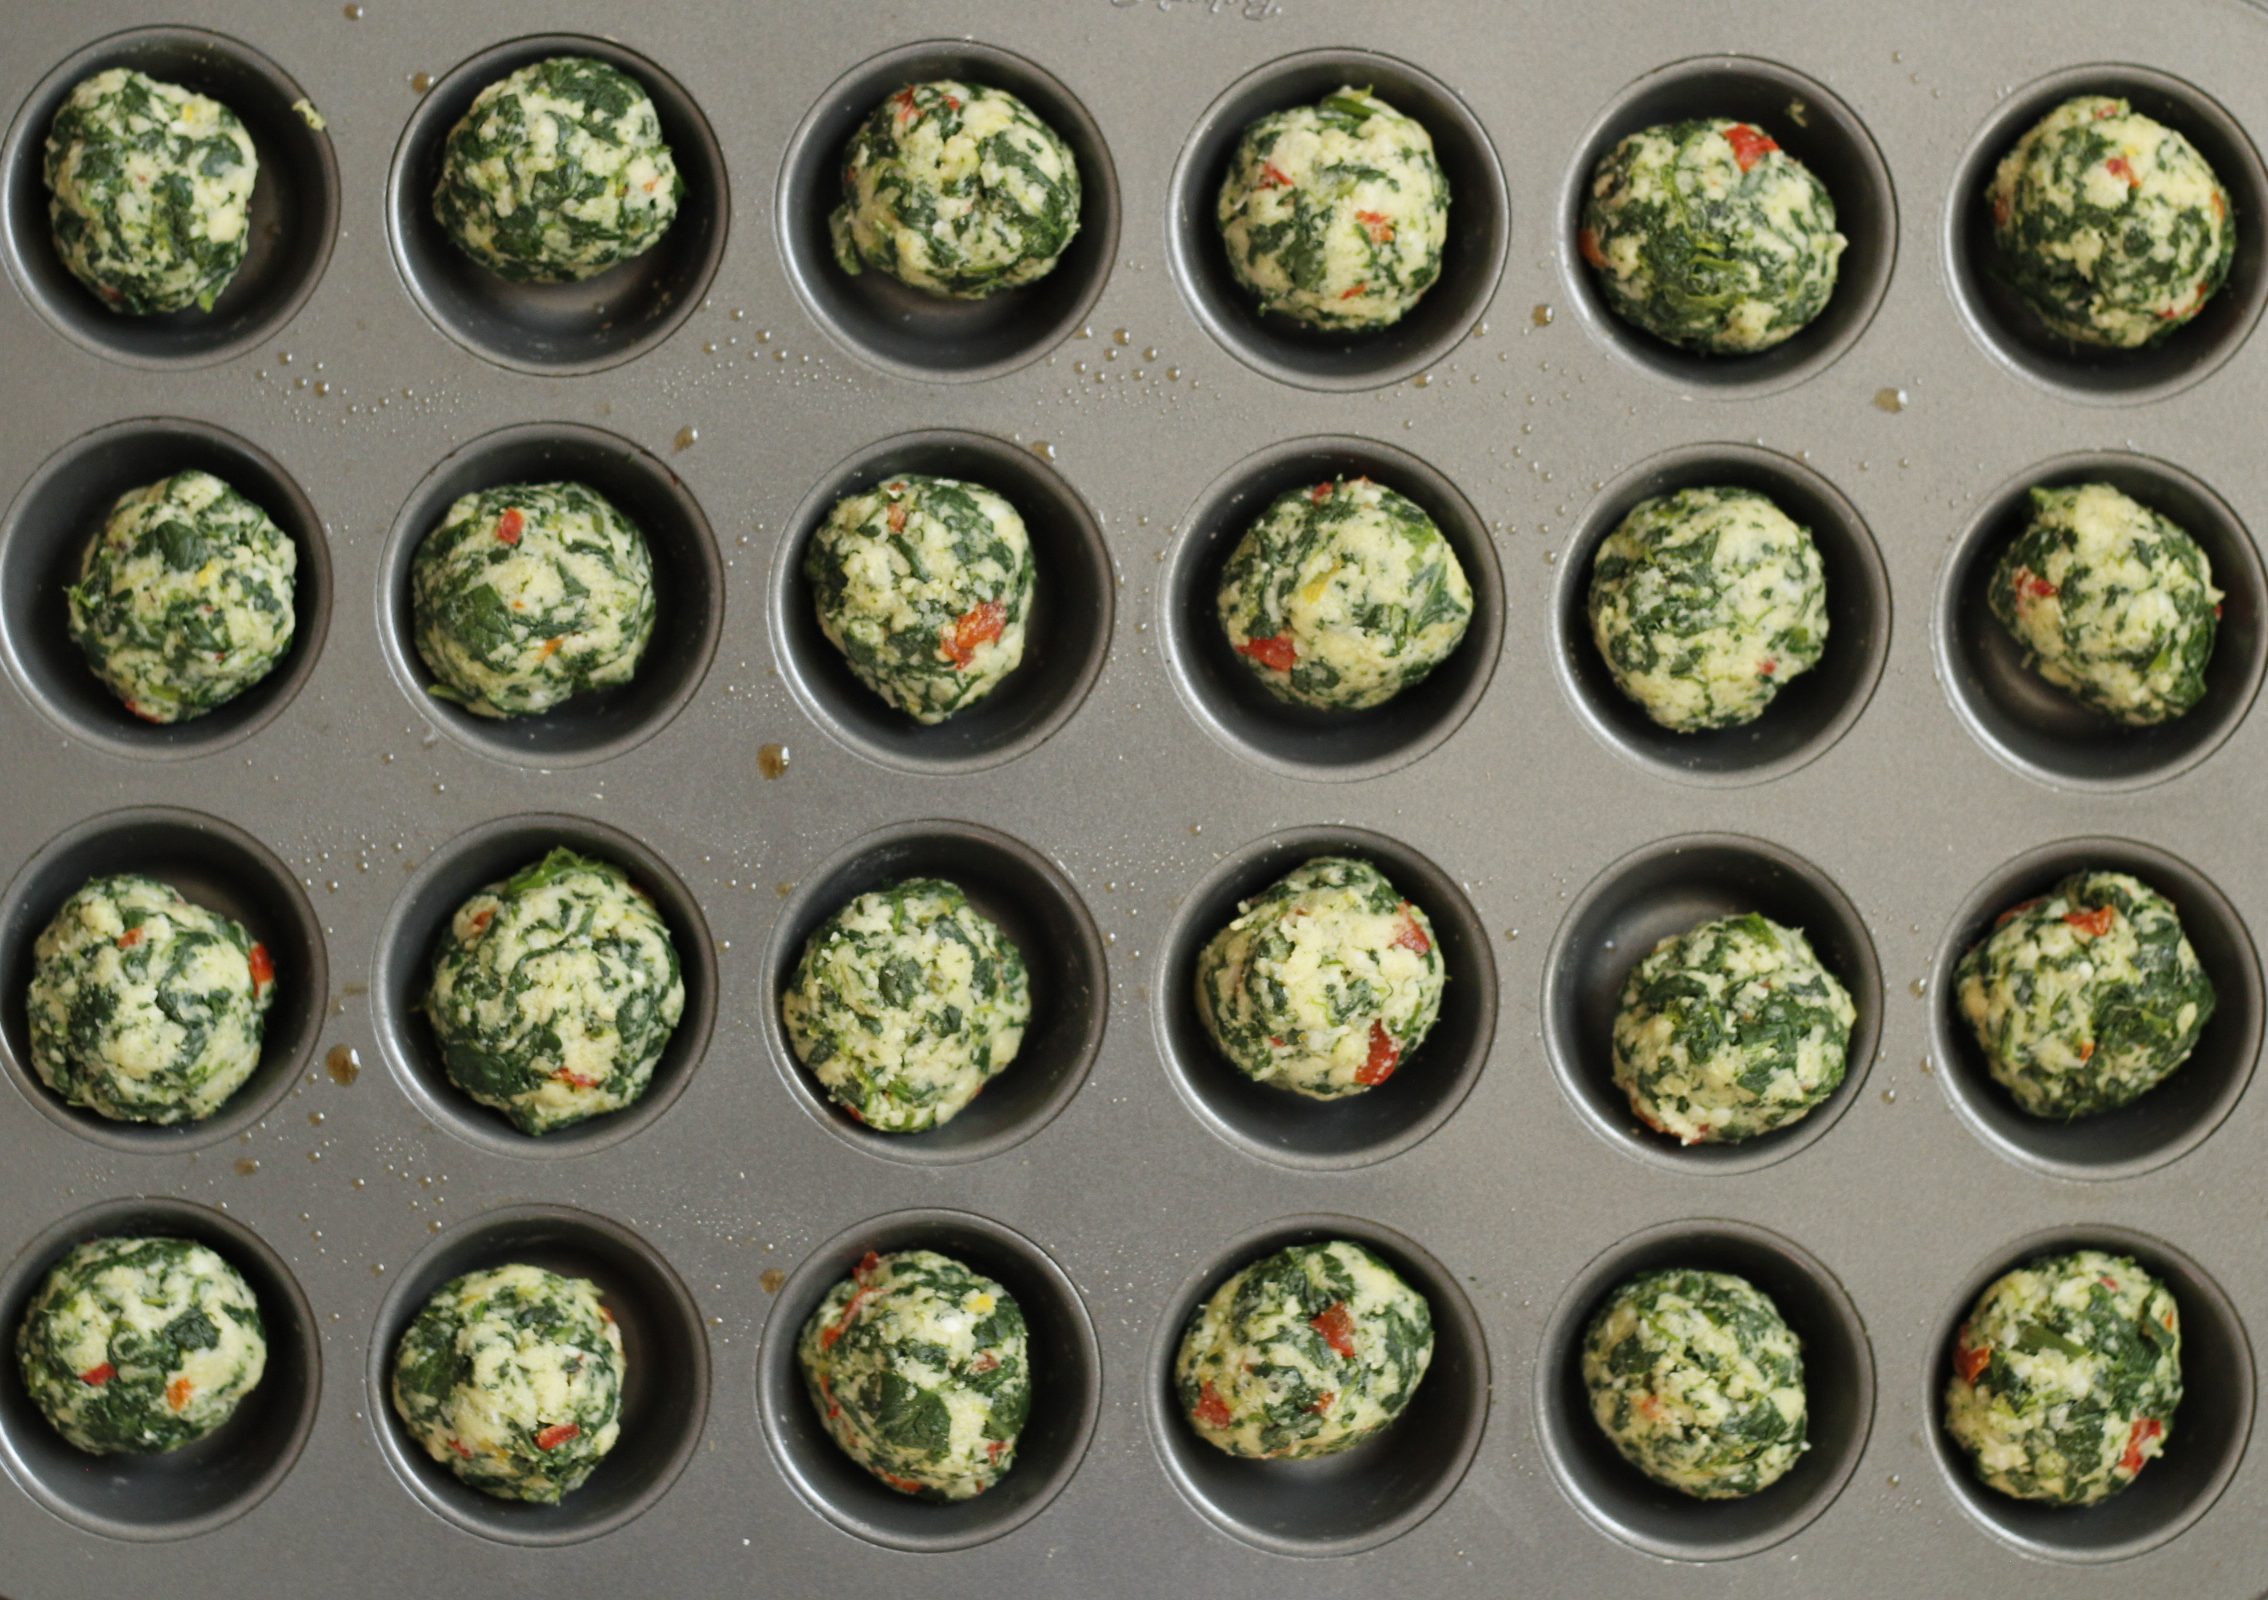 A detail shot showing a close-up of collard green balls on a muffin tray. 